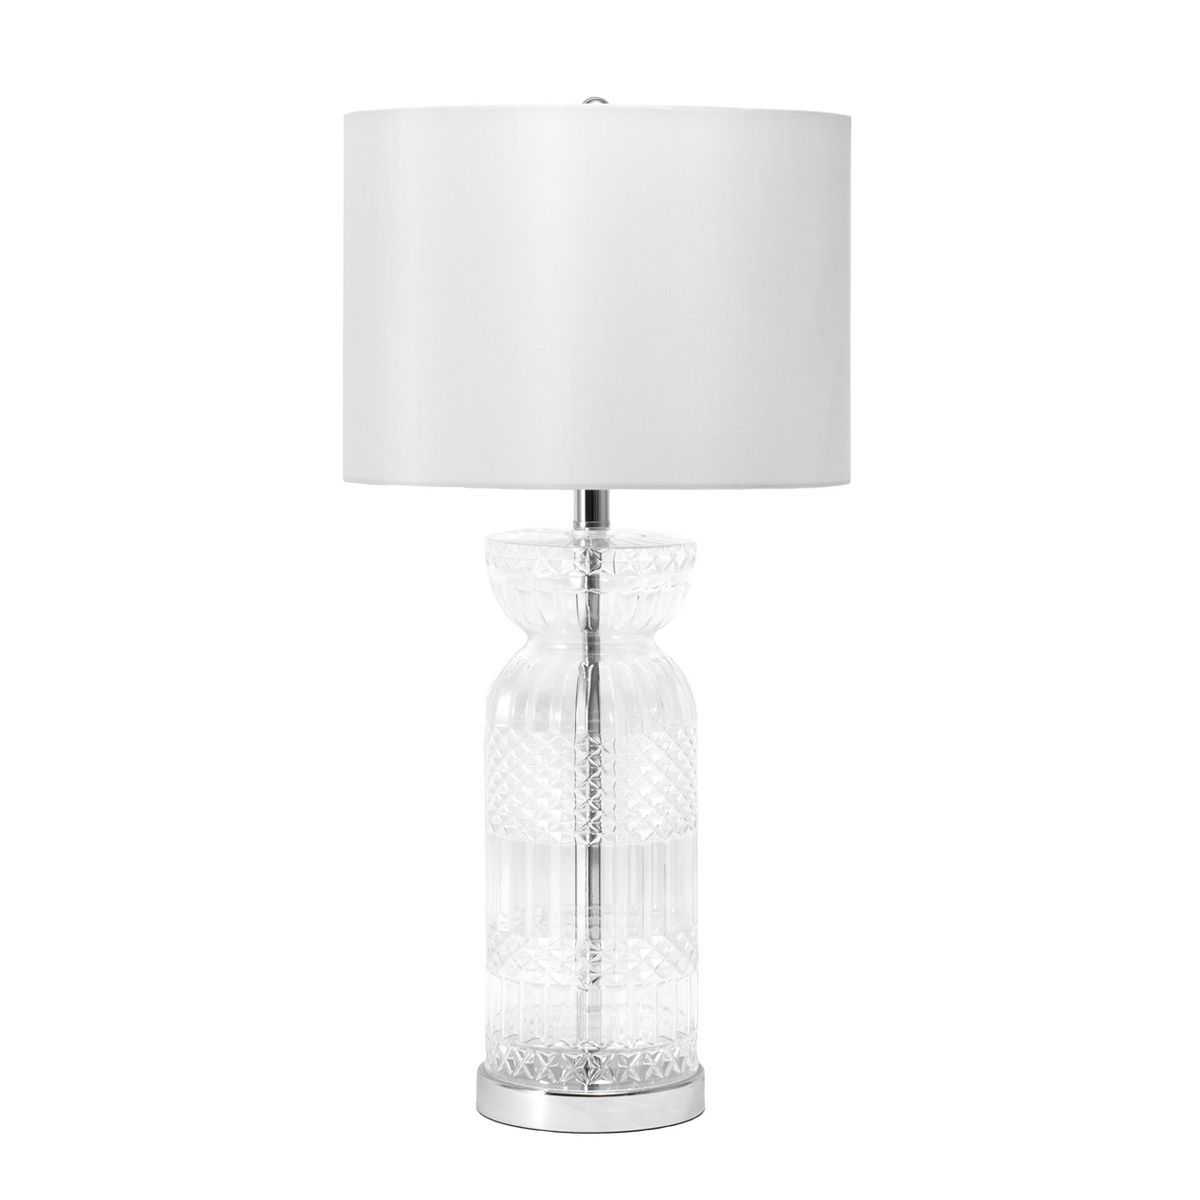 nuLOOM Catania 28" Glass Table Lamp | Target